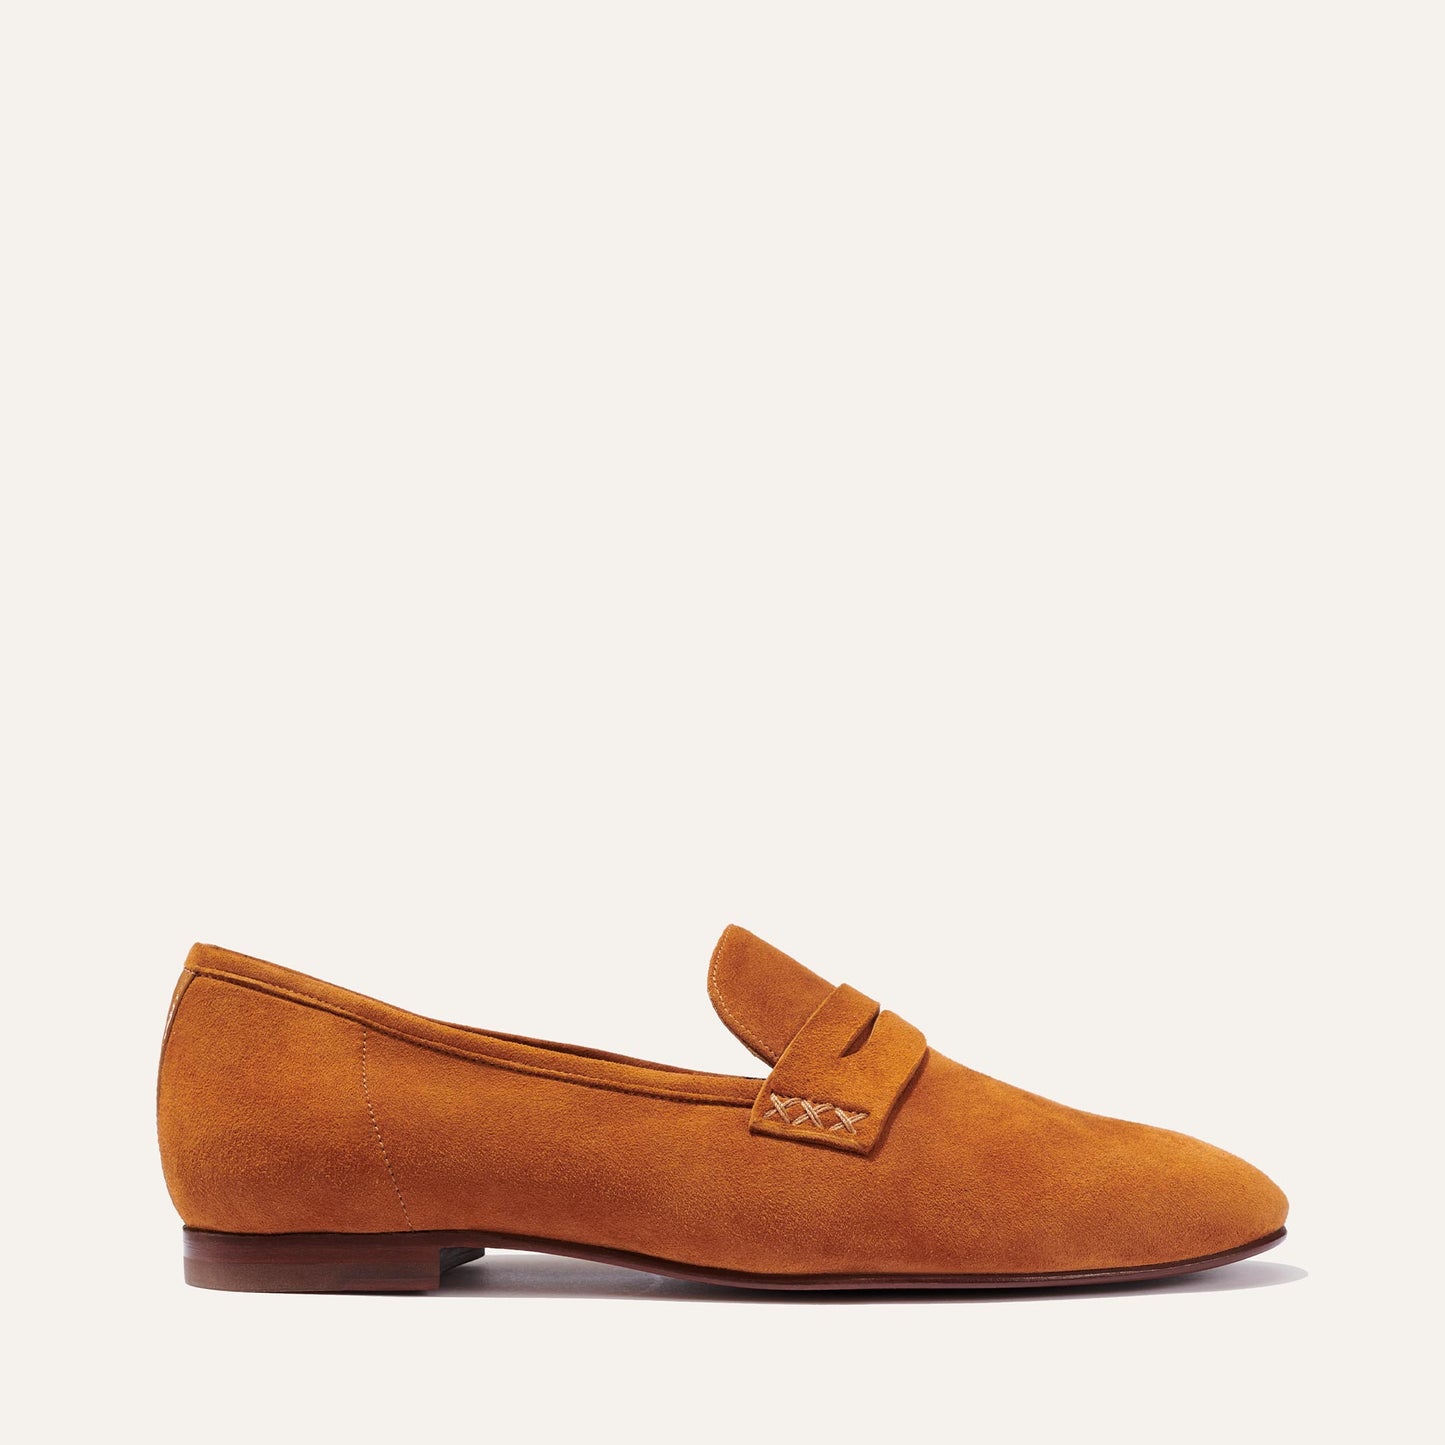 Margaux's classic and comfortable Penny loafer, made in a soft, caramel brown Italian suede